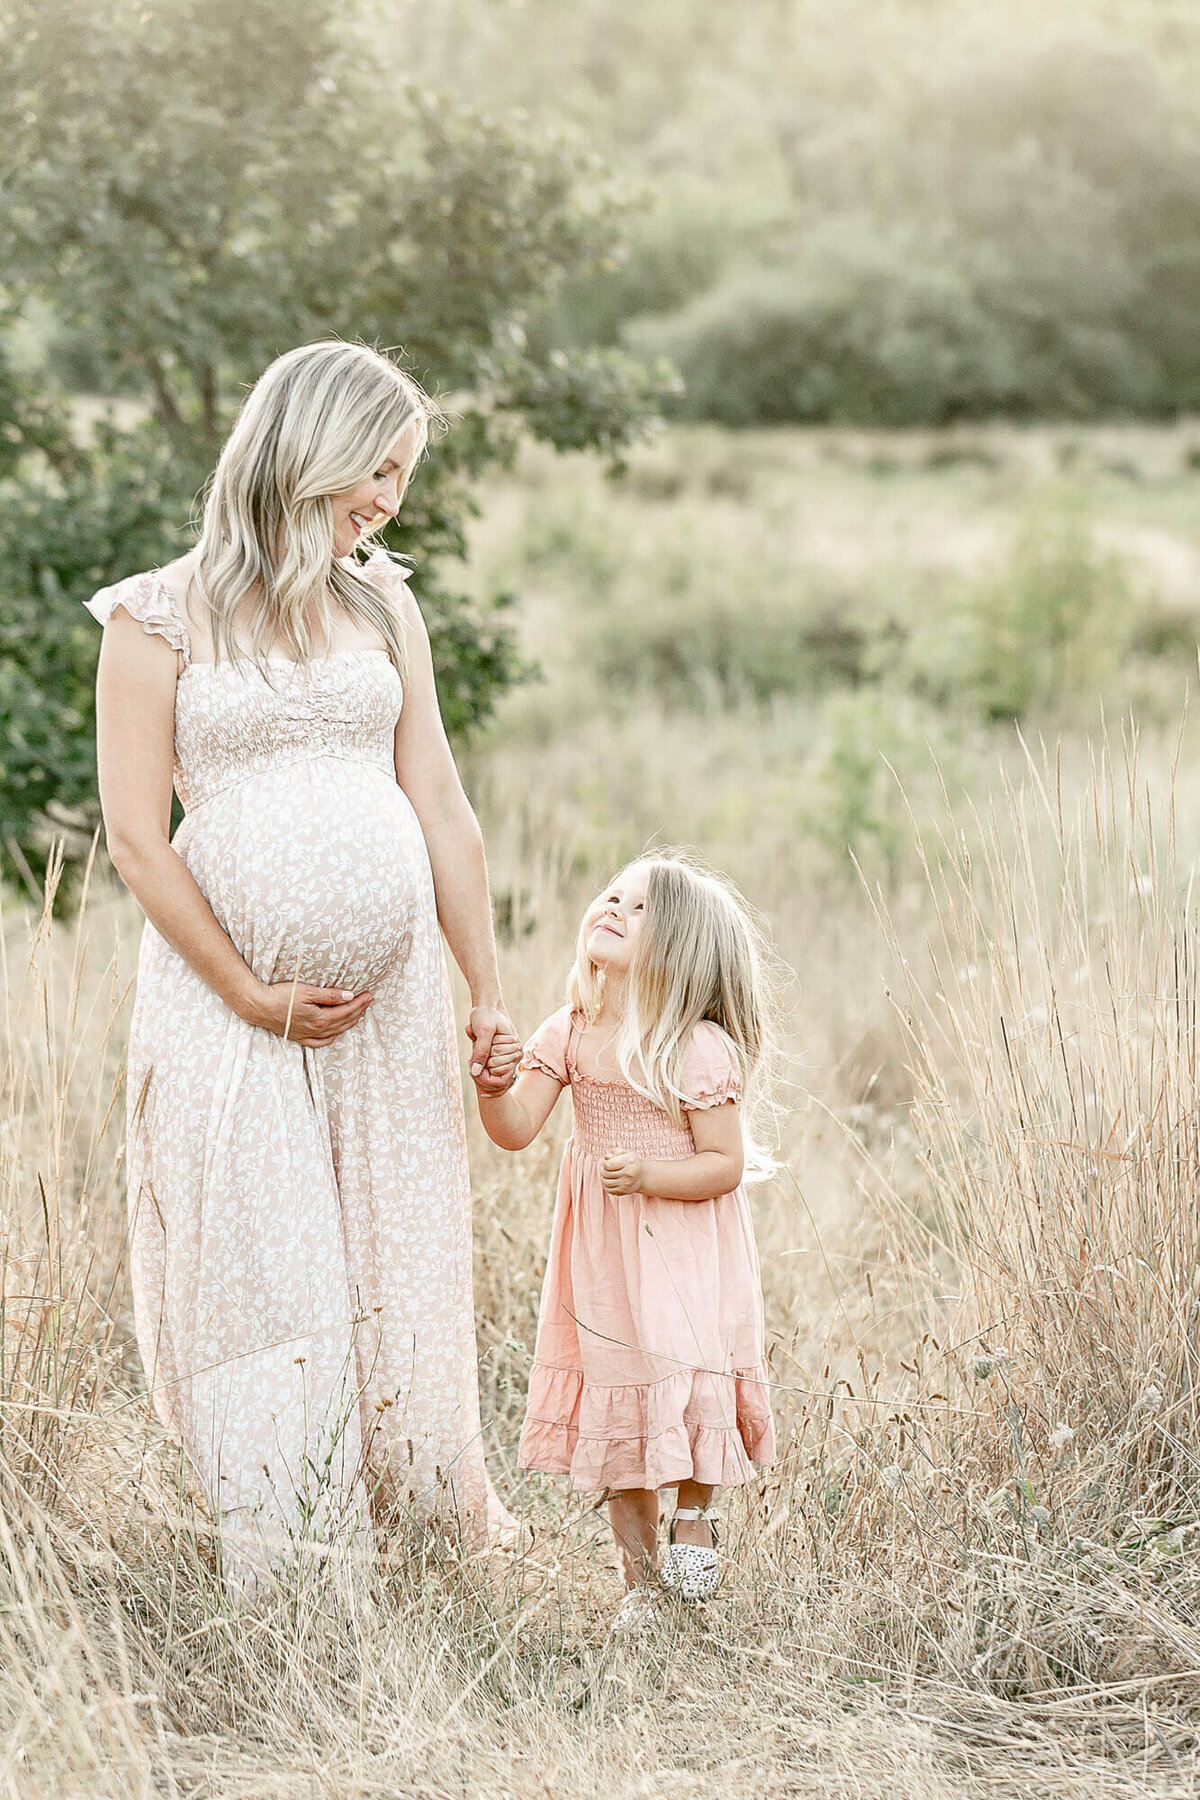 Mom holding her baby bump with one hand and holding hands with her toddler girl. She and her toddler are looking  at each other and walking in a field of tall golden grasses.